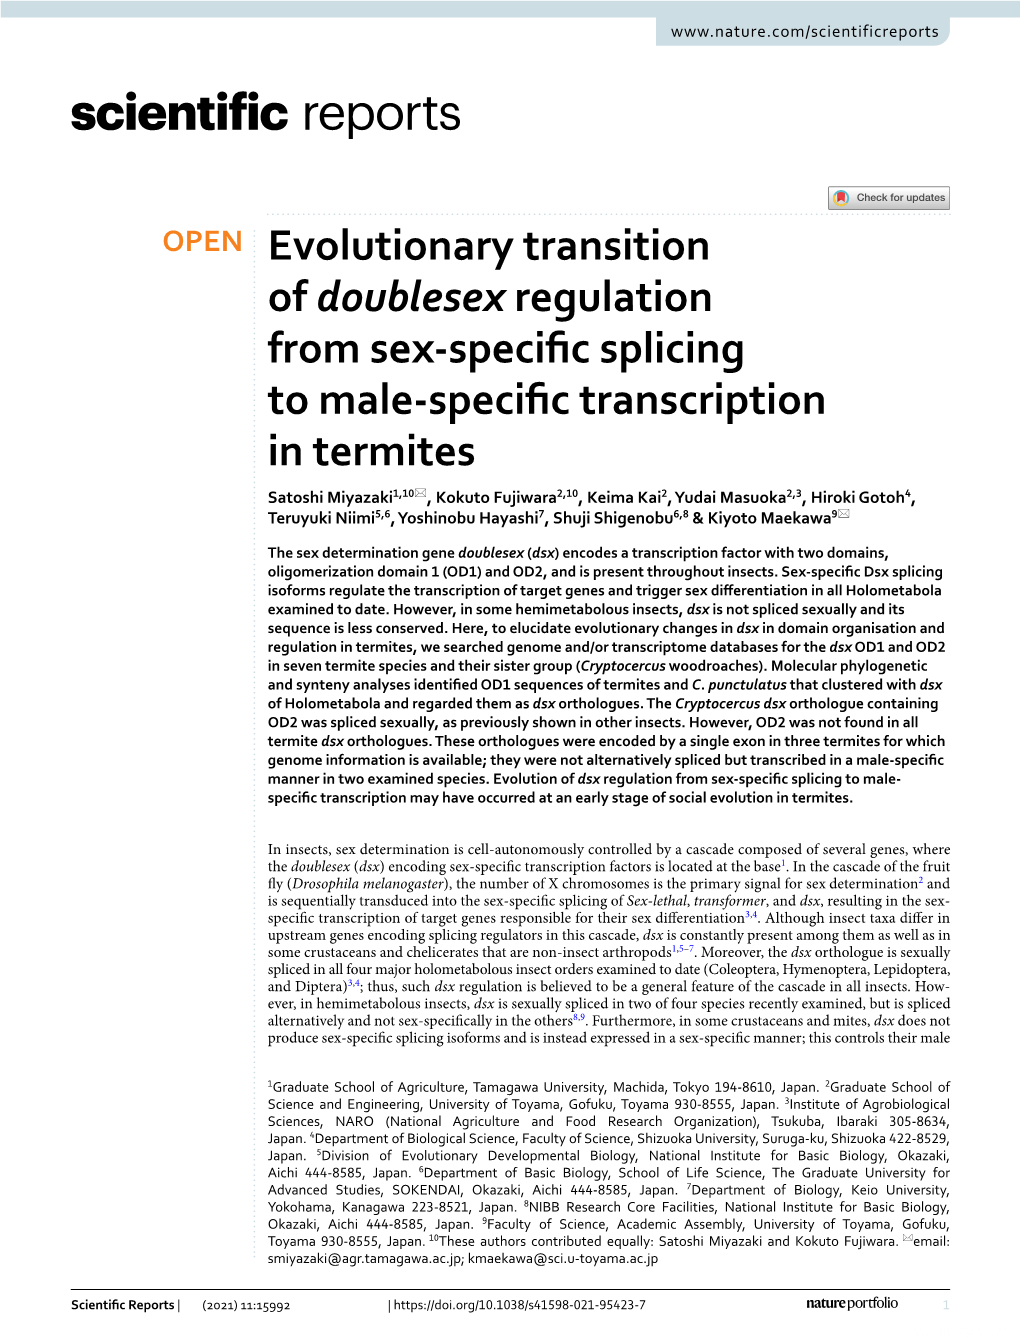 Evolutionary Transition of Doublesex Regulation from Sex-Specific Splicing